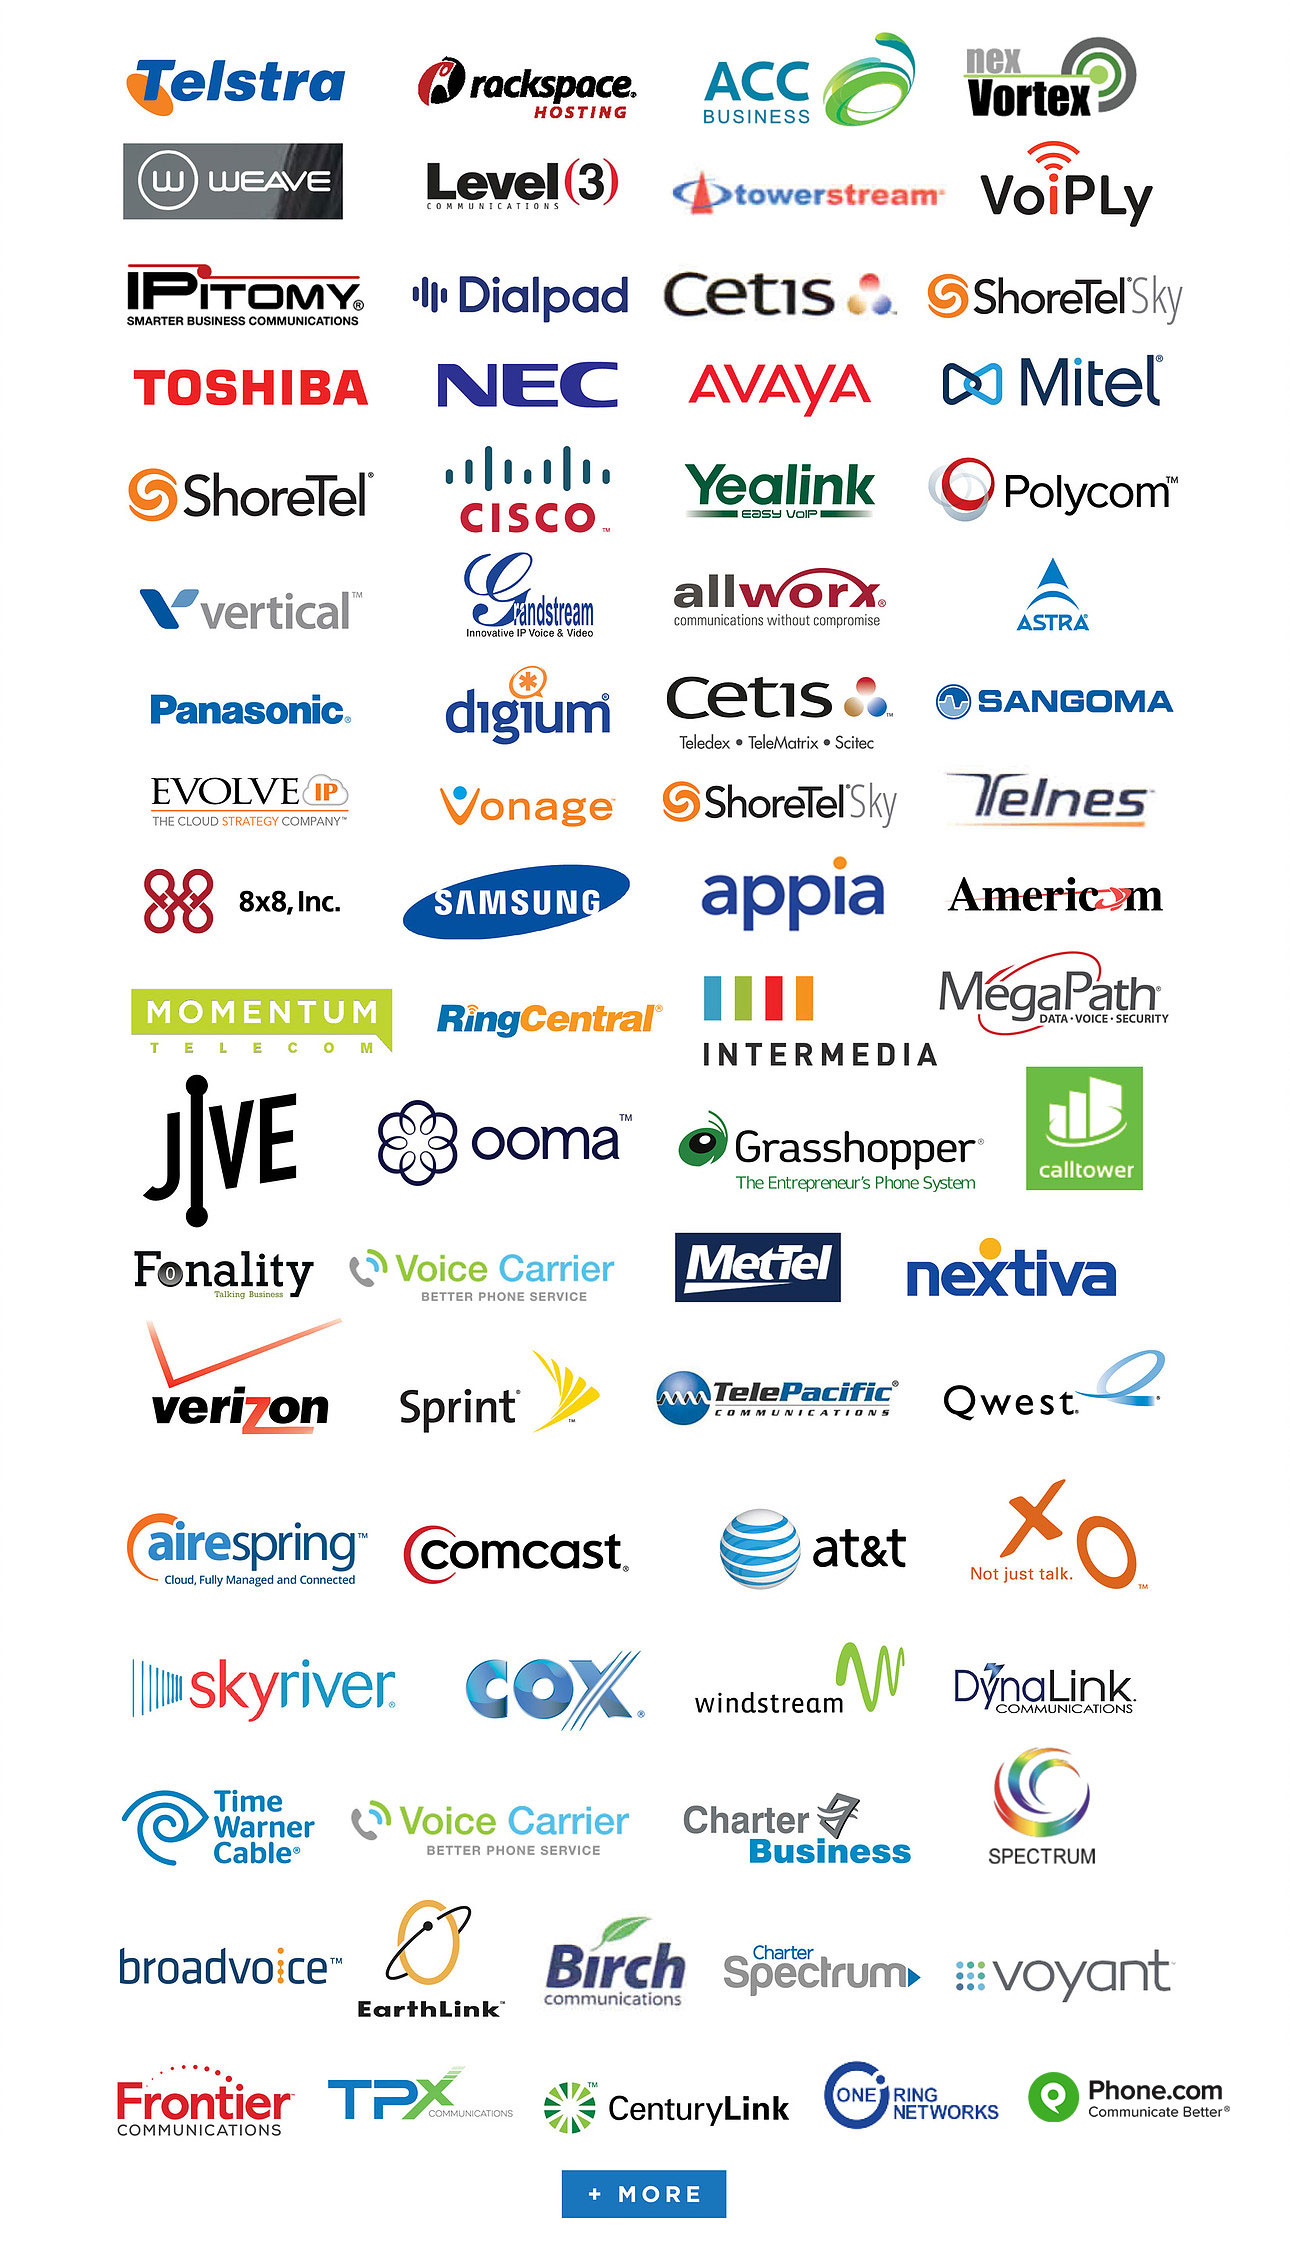 Intellicom partners with multiple organizations to provide the best services for customers